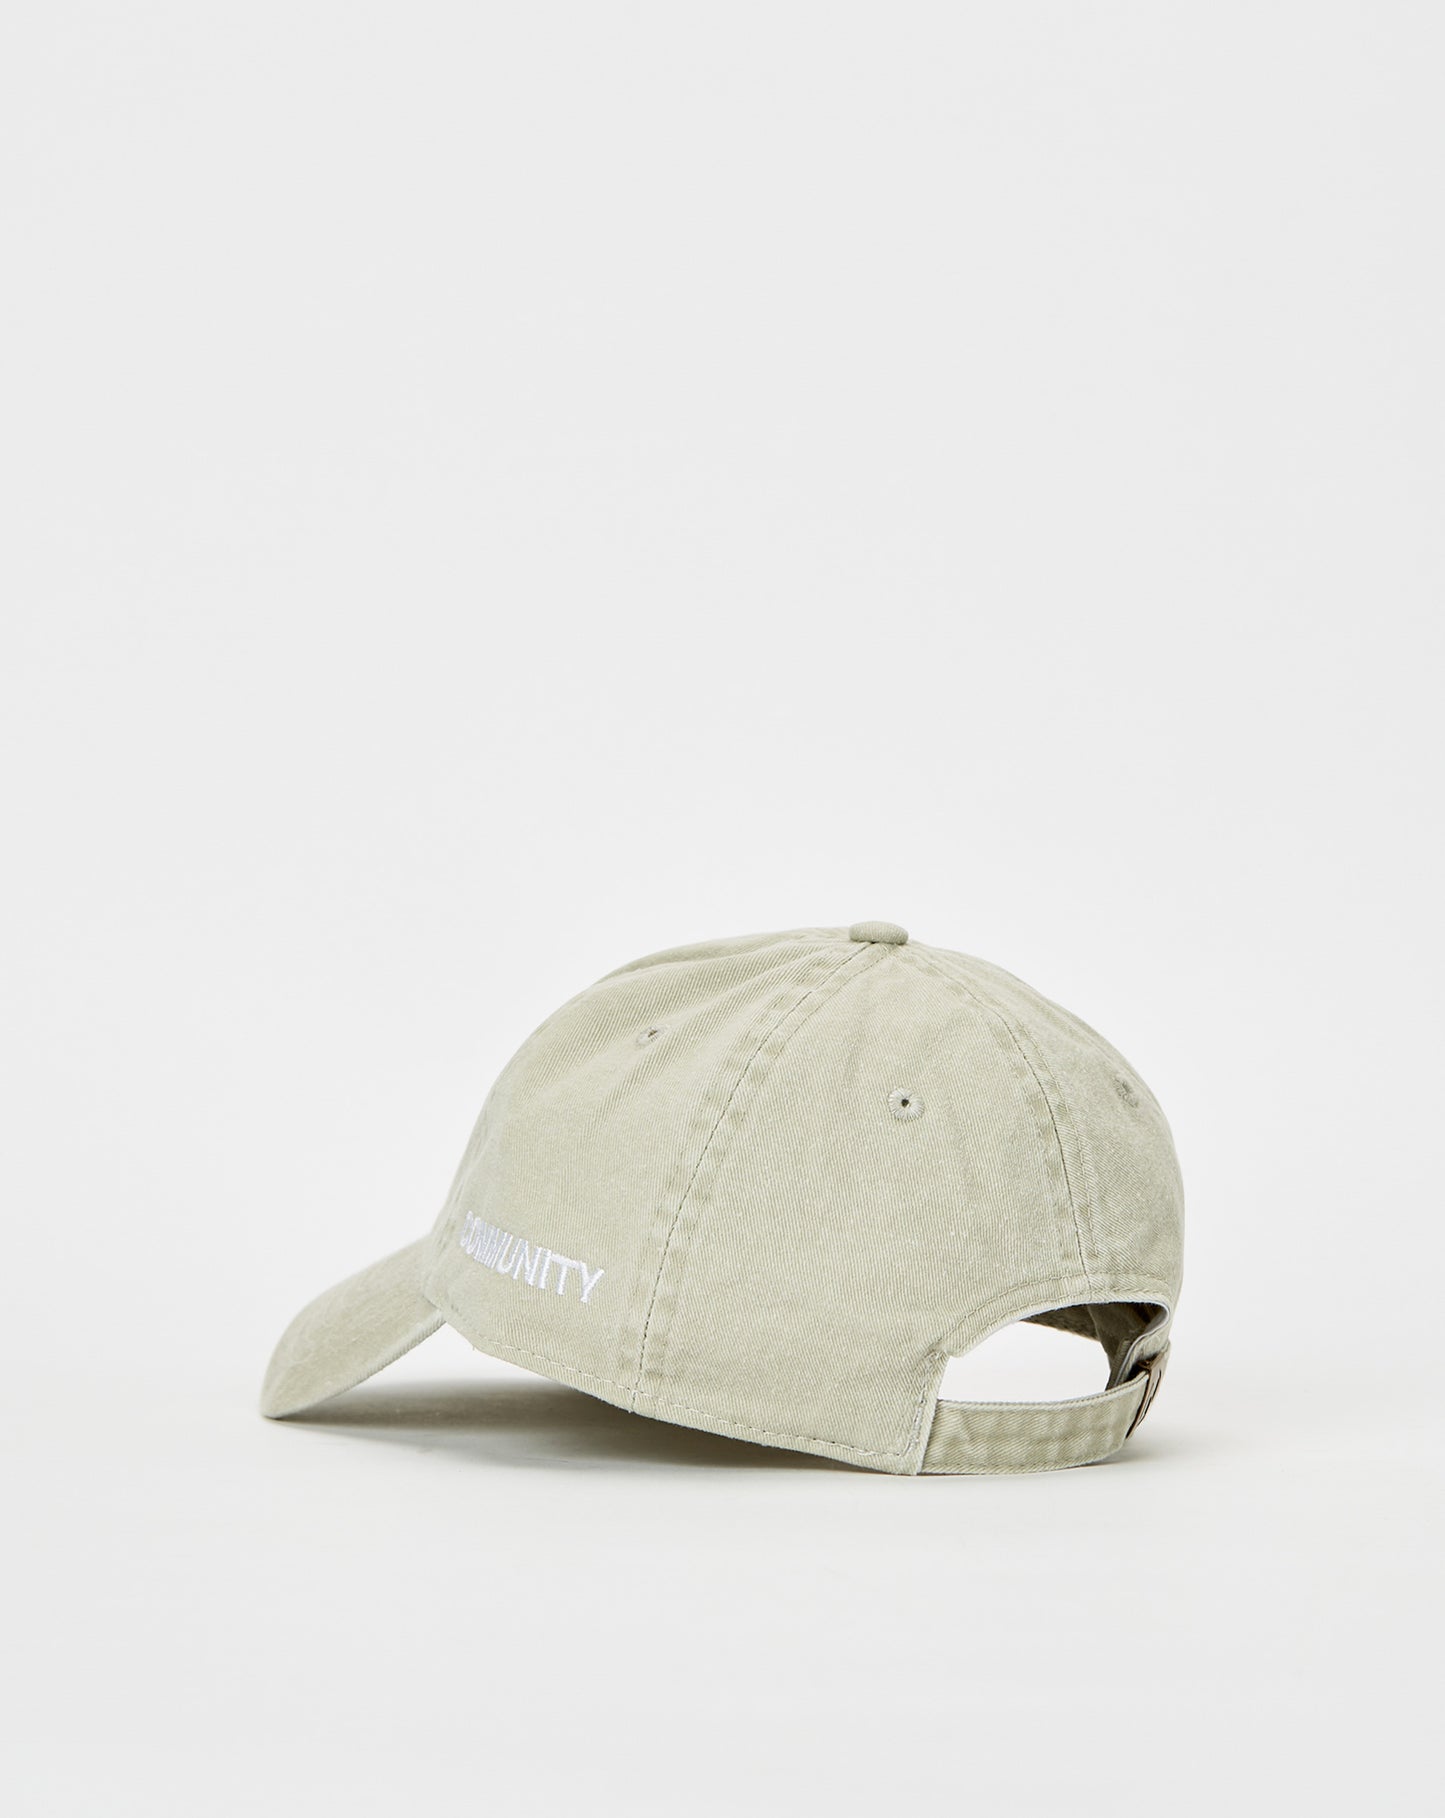 Speedball Community Approved Hat- Sand